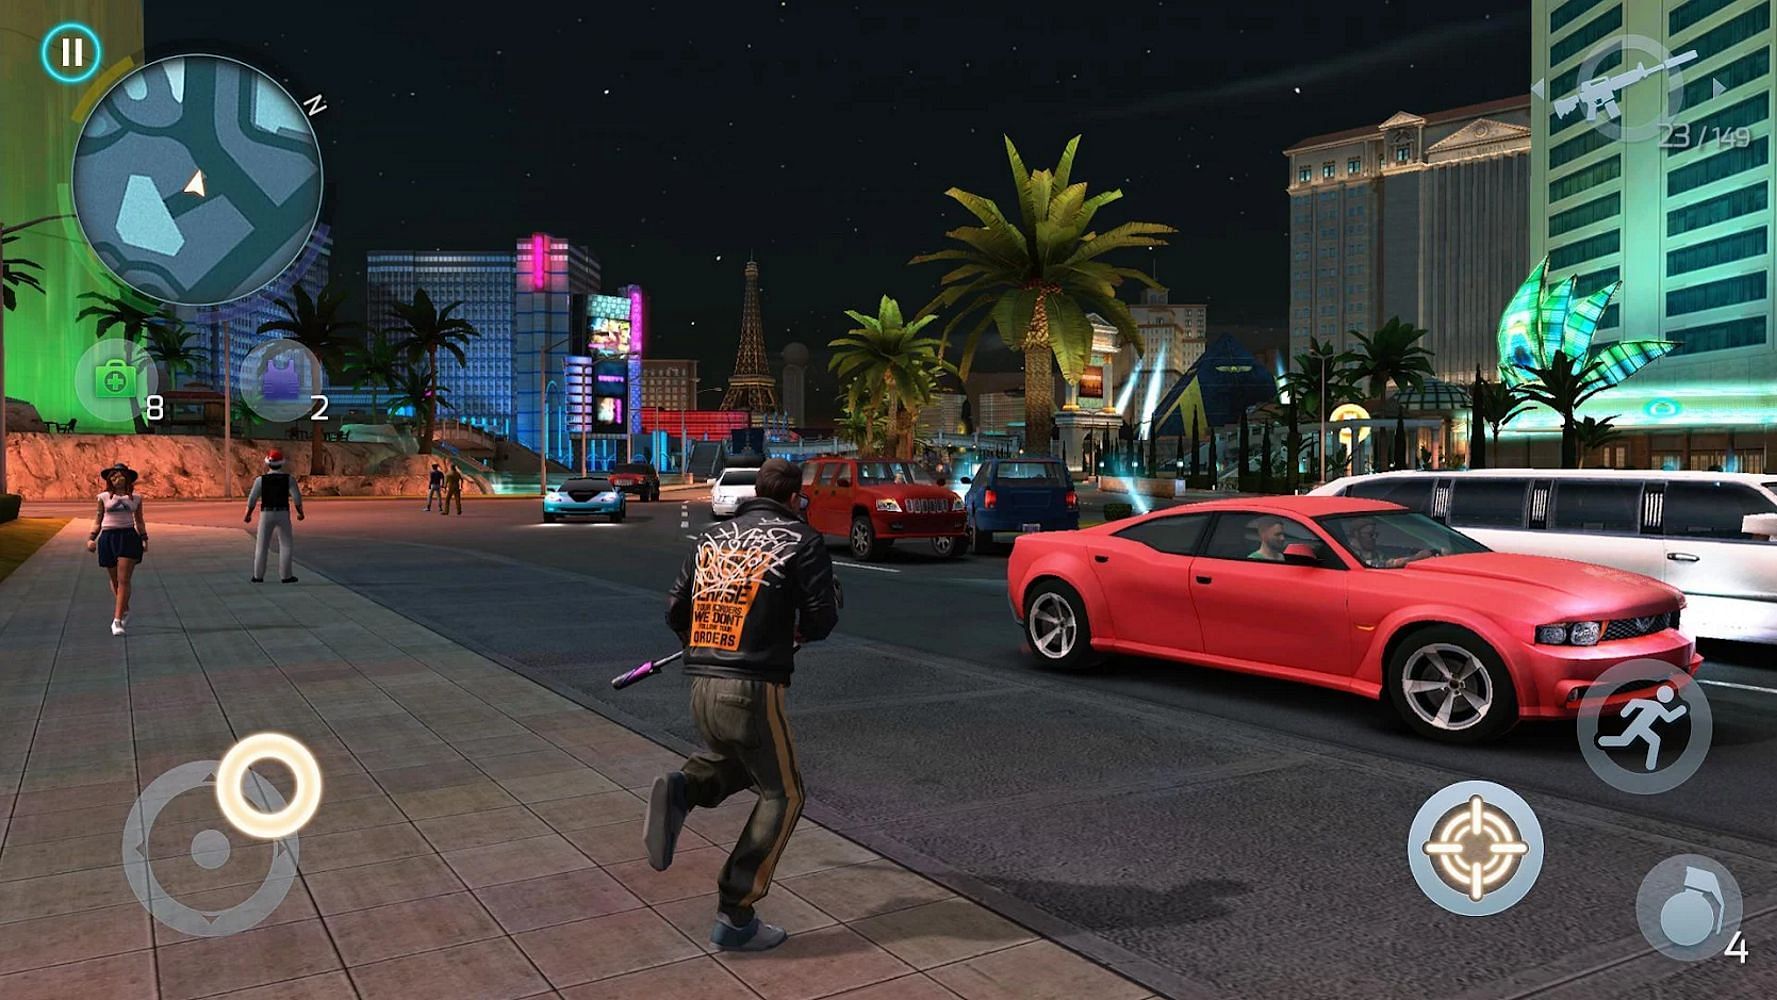 Gta 5 mobile but actually good by pclug